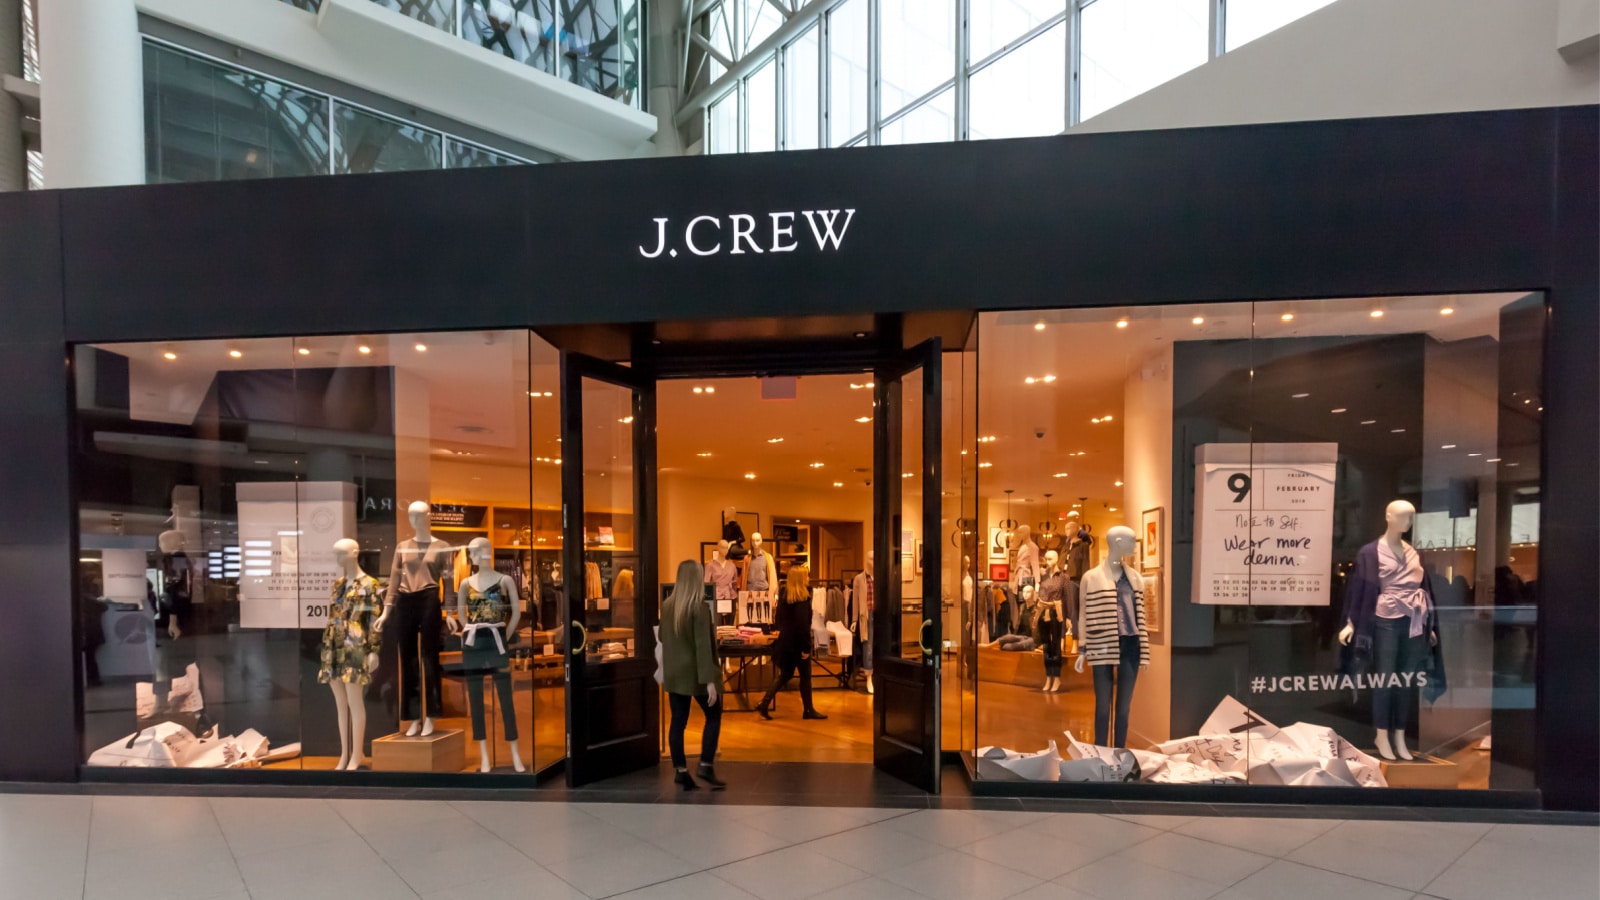 Toronto, Canada - February 10, 2018: J.Crew storefront in the Eaton Centre shopping mall in Toronto. J.Crew Group, Inc., is an American multi-brand, multi-channel, specialty retailer.